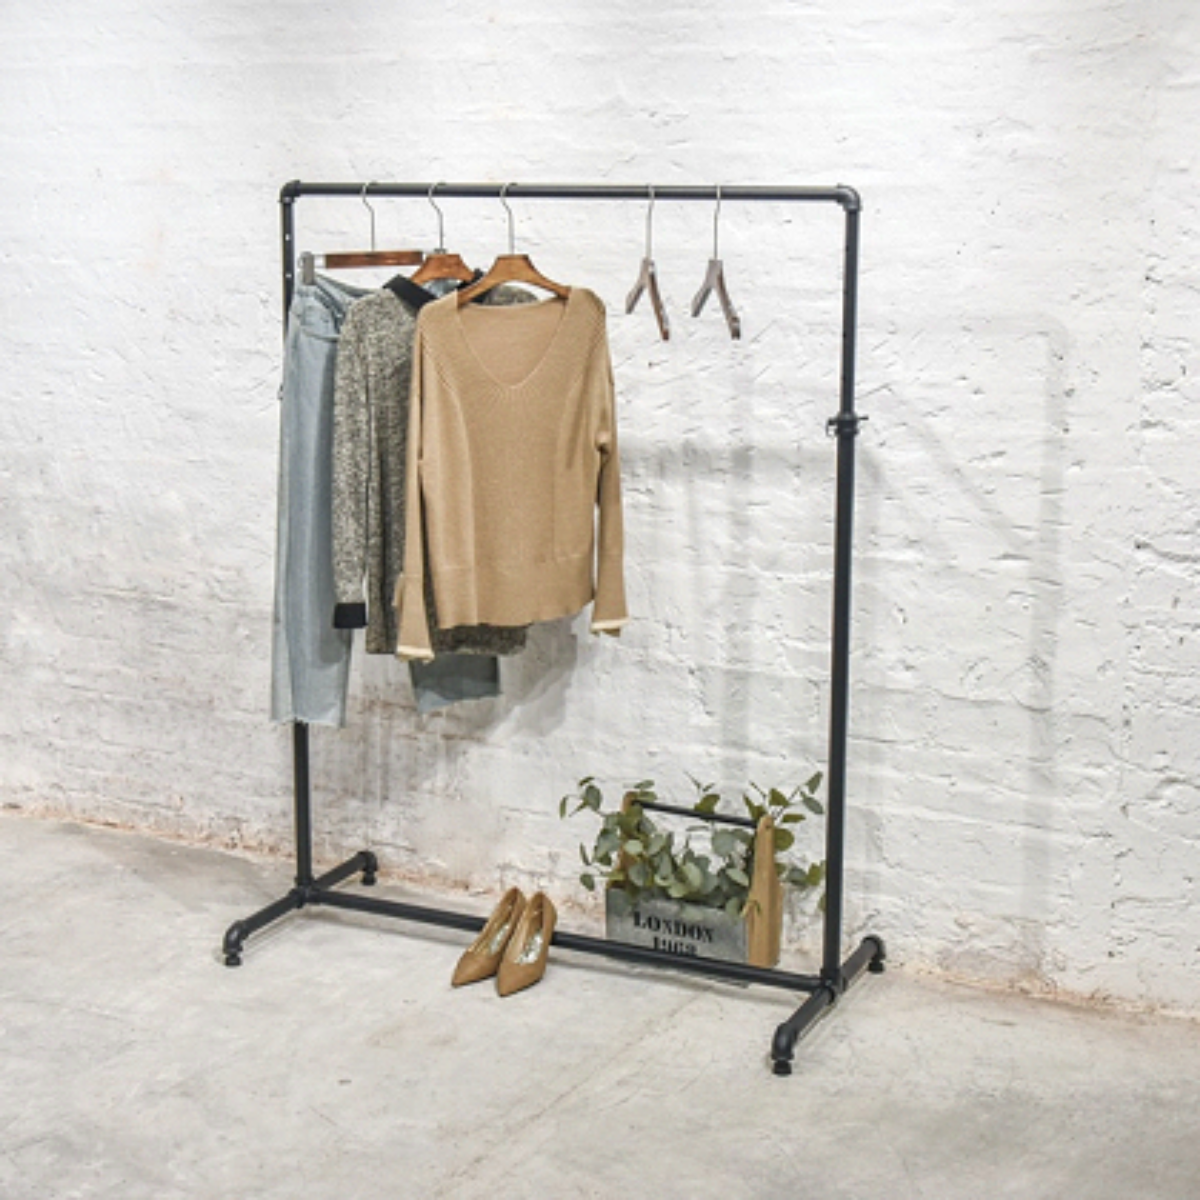 How Clothing Racks Can Benefit Your Business